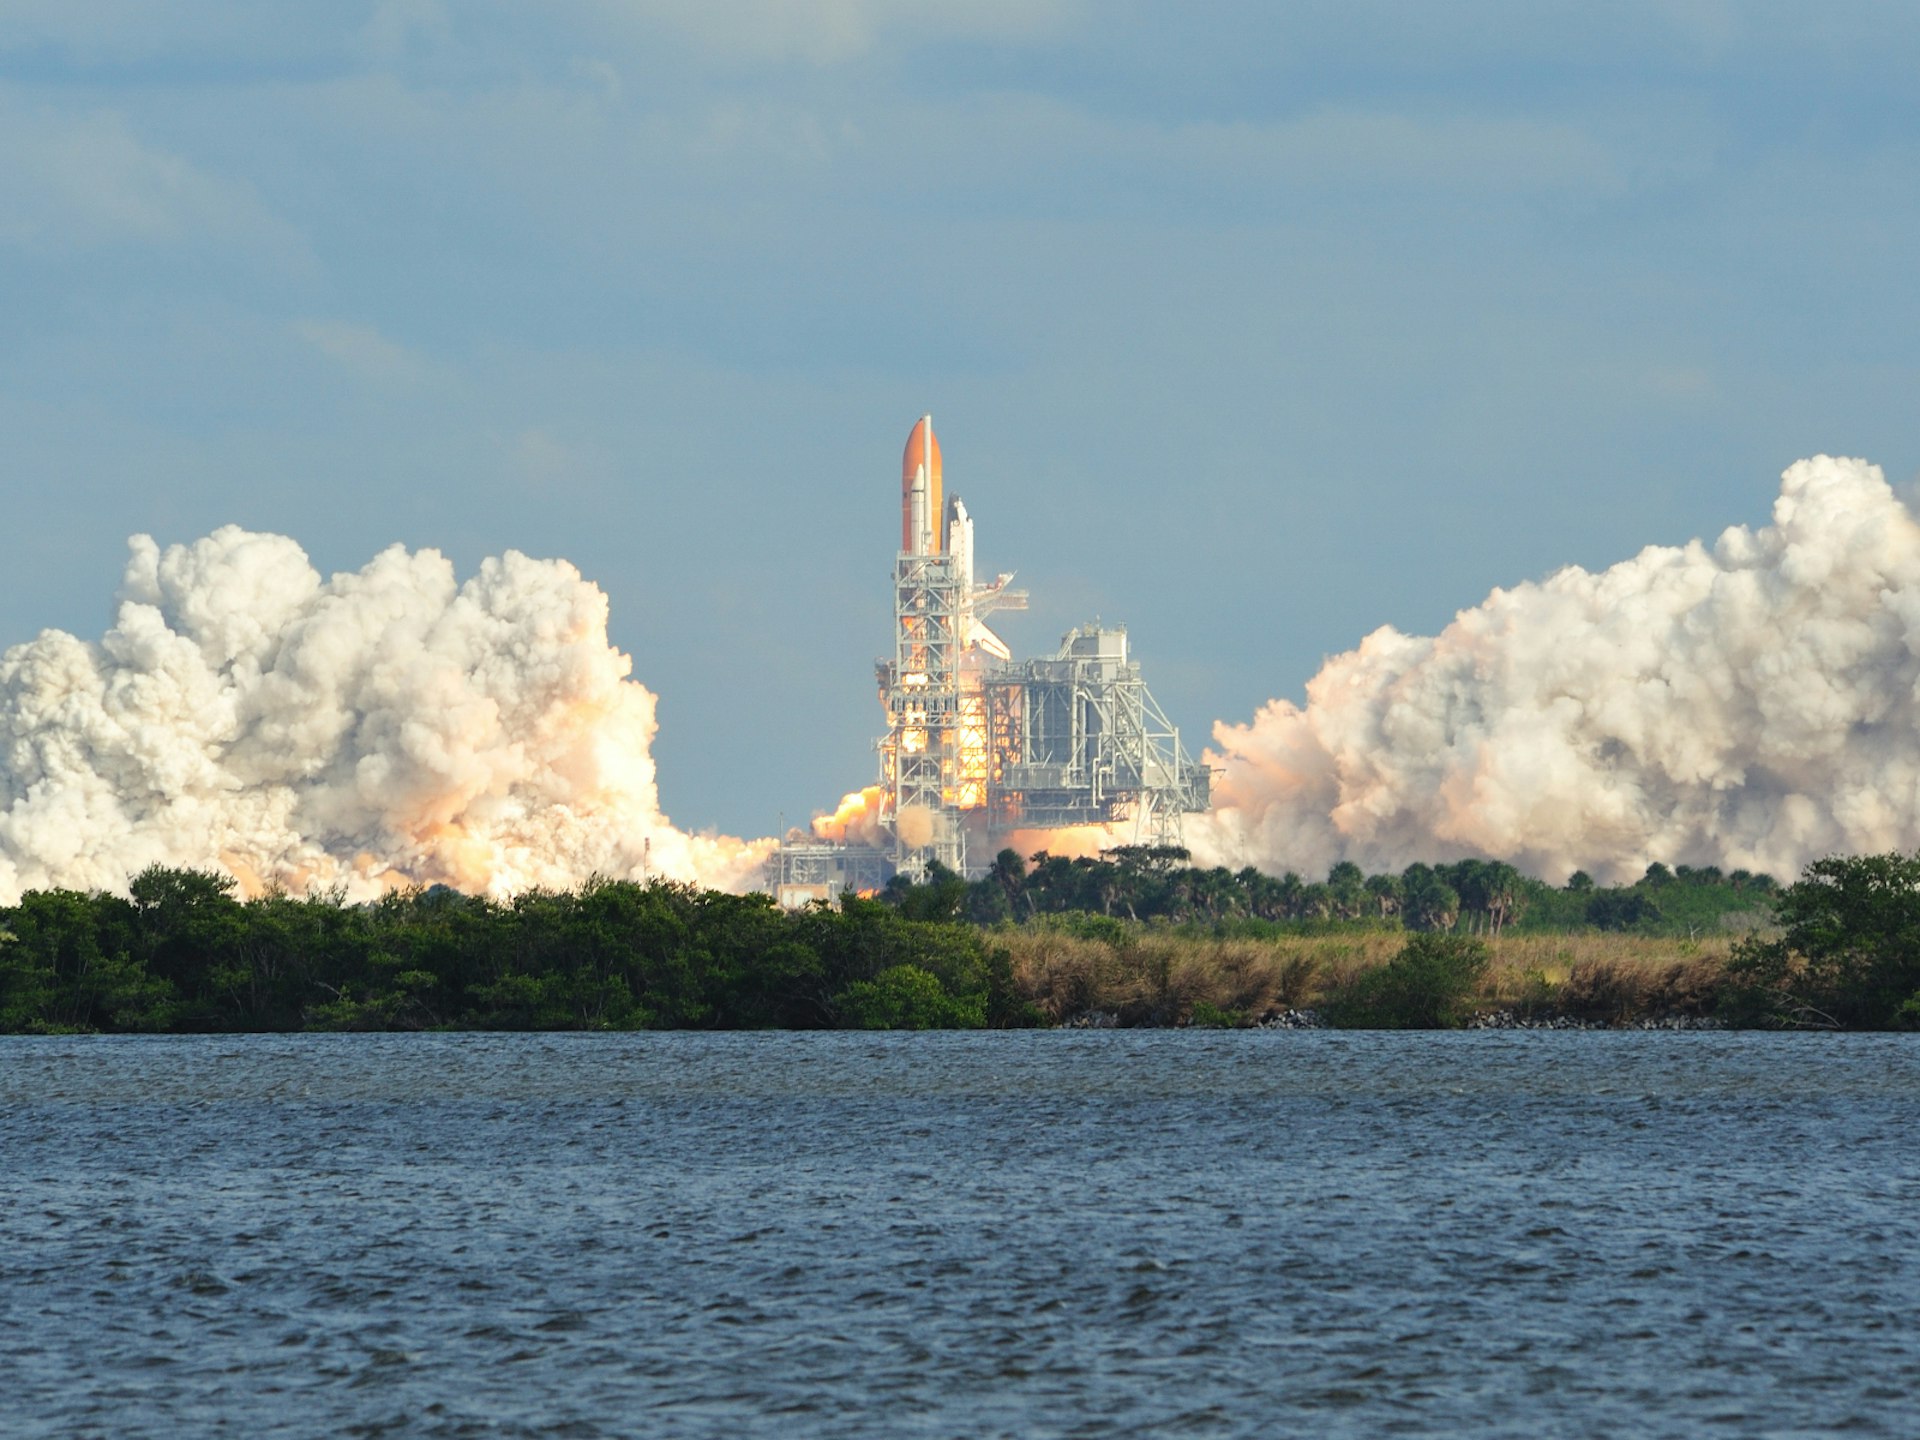 Space Shuttle Atlantis launches from the Kennedy Space Center in 2009